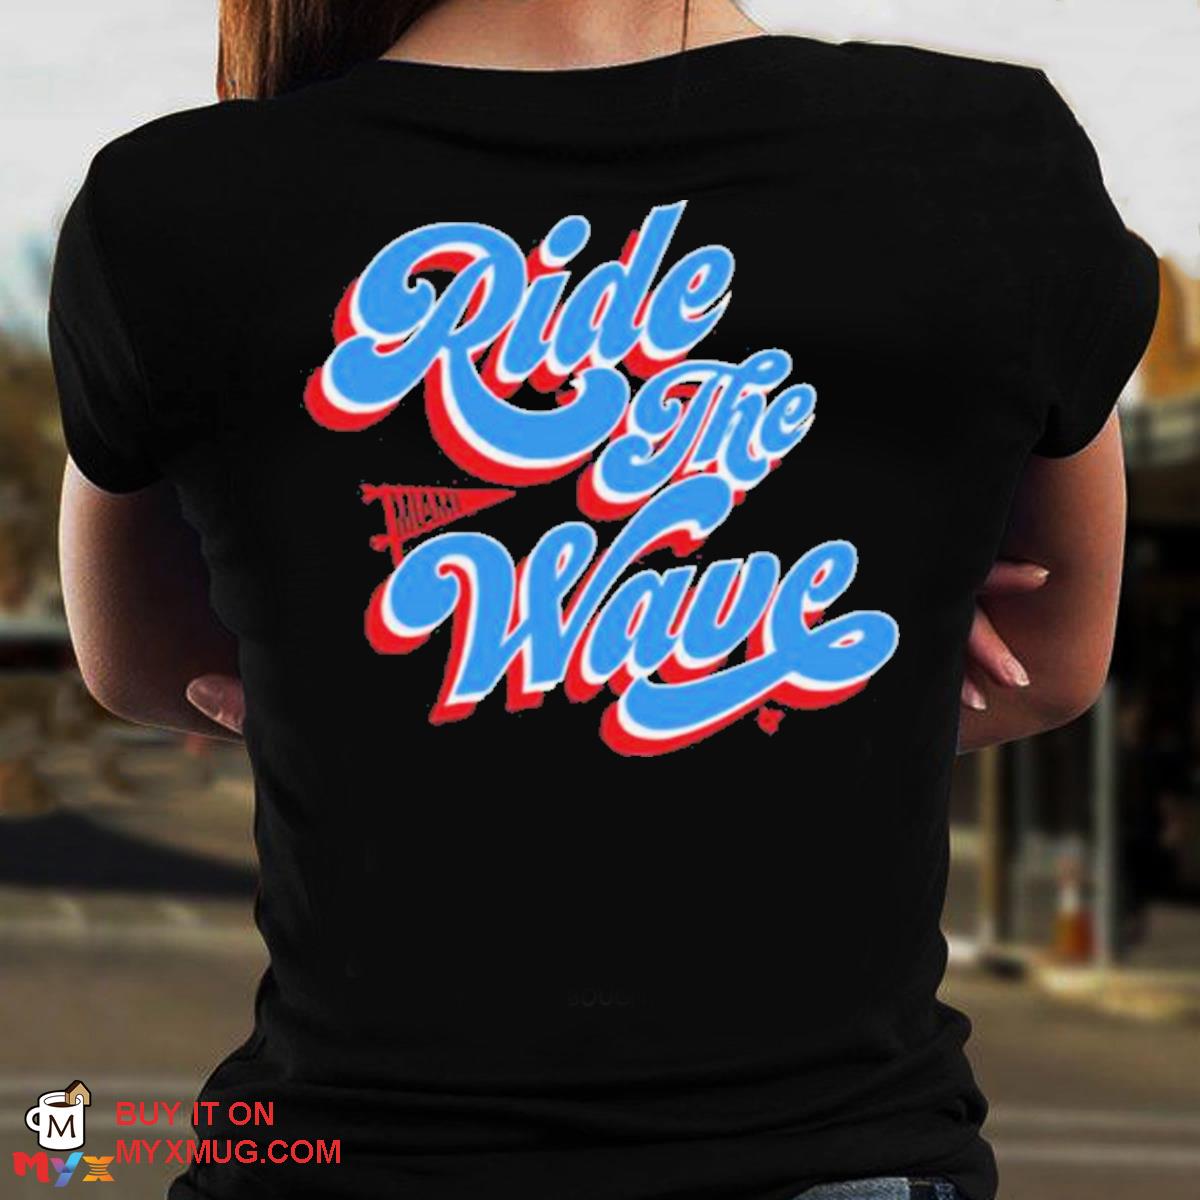 Top ride the wave breakingt s shirt print on back